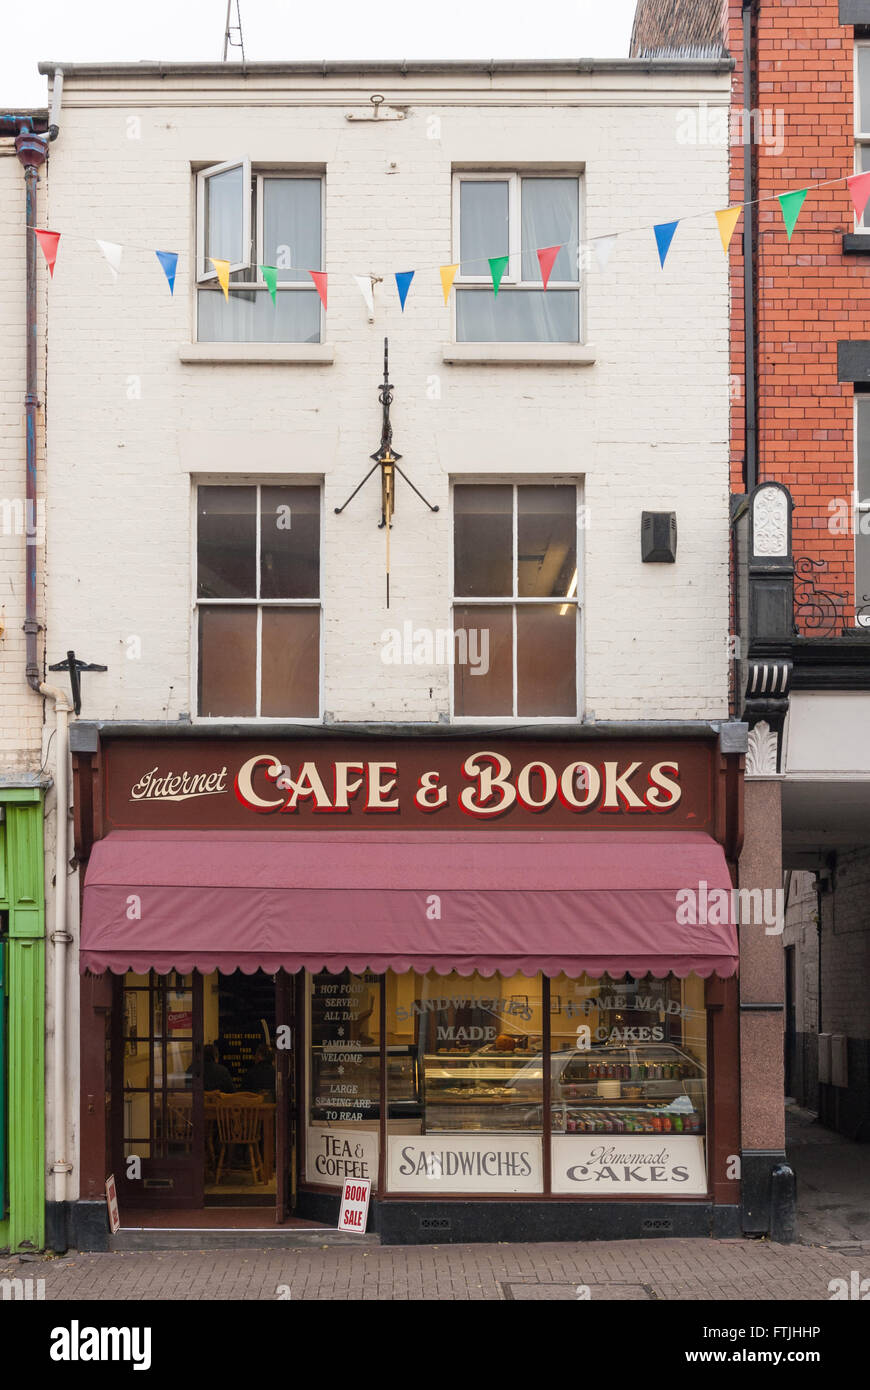 Maxines Cafe & Books a long standing traditional and popular Internet cafe and book store in Llangollen Denbighshire Wales Stock Photo